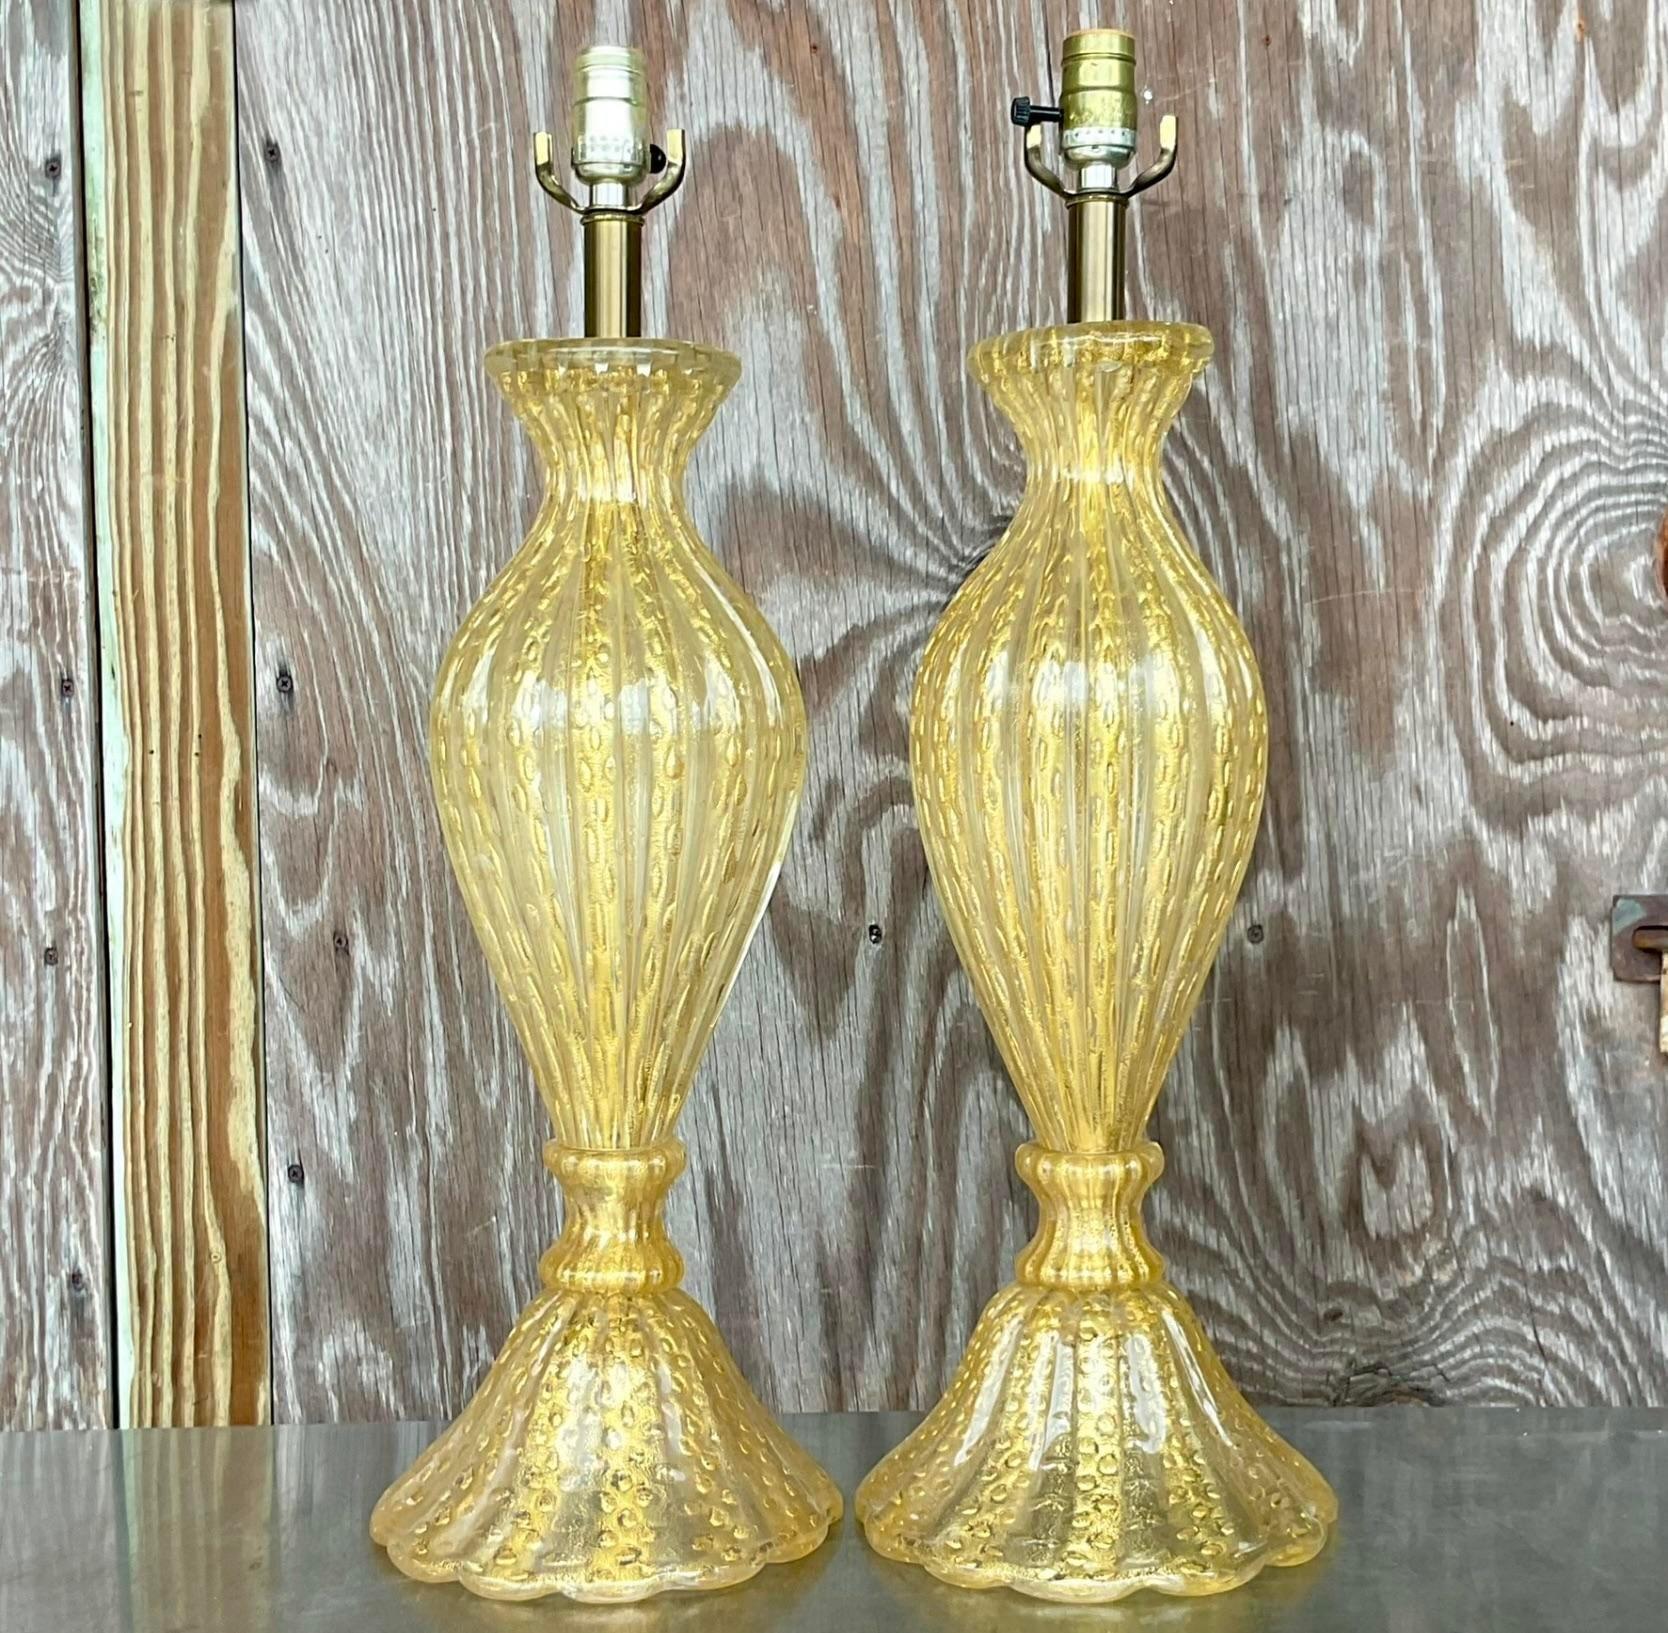 Vintage Regency Restored Murano Glass Table Lamps - a Pair In Good Condition For Sale In west palm beach, FL